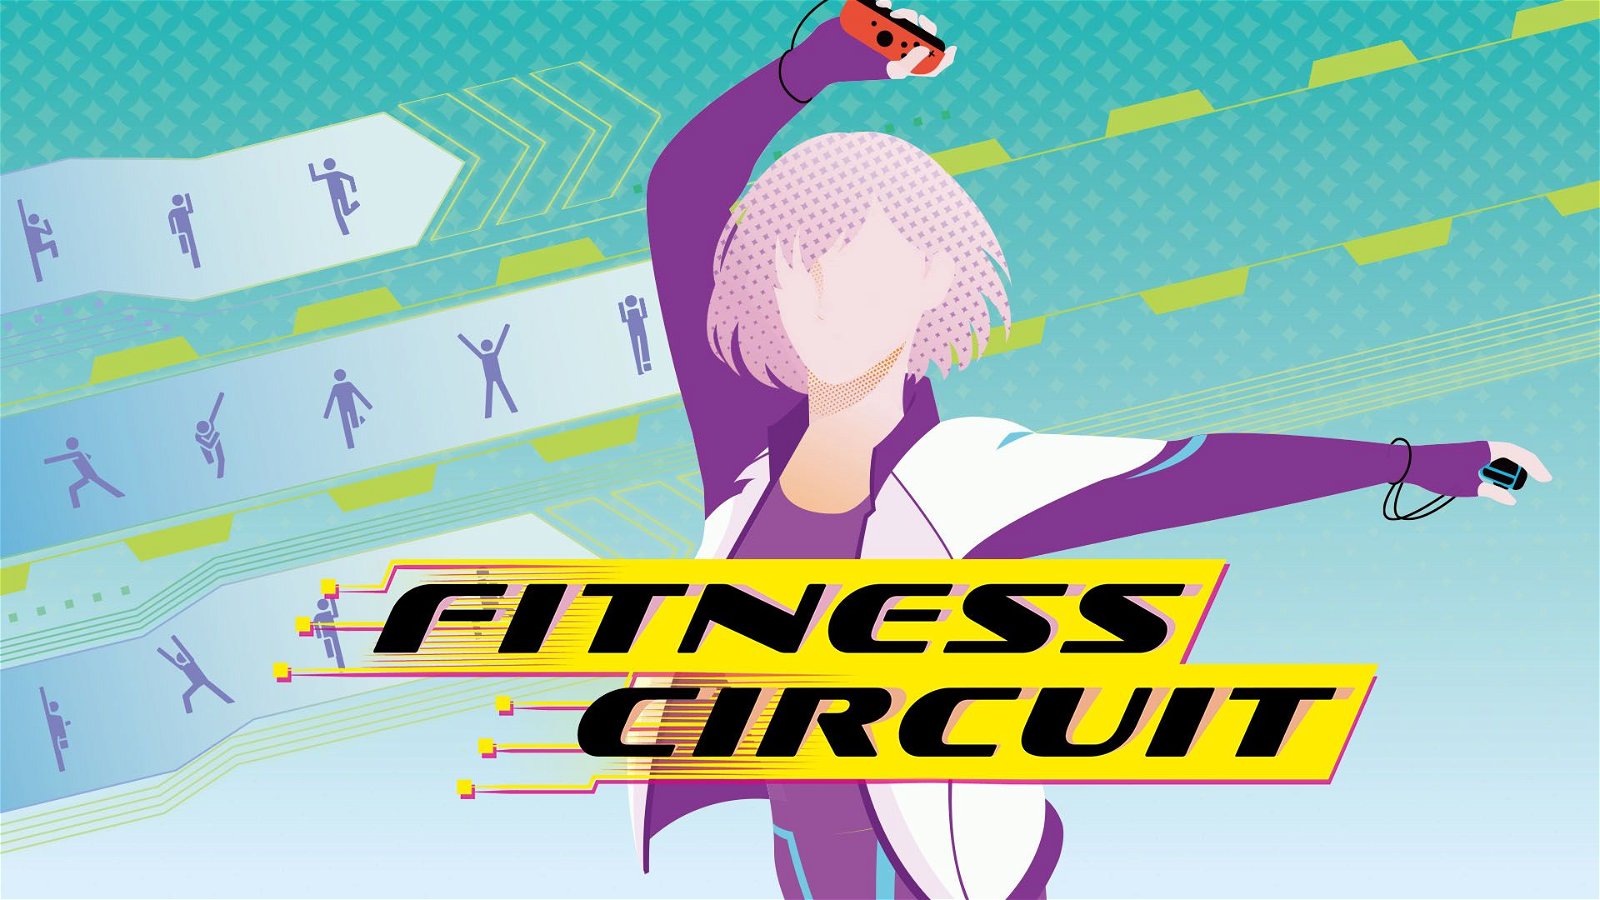 Image of Fitness Circuit